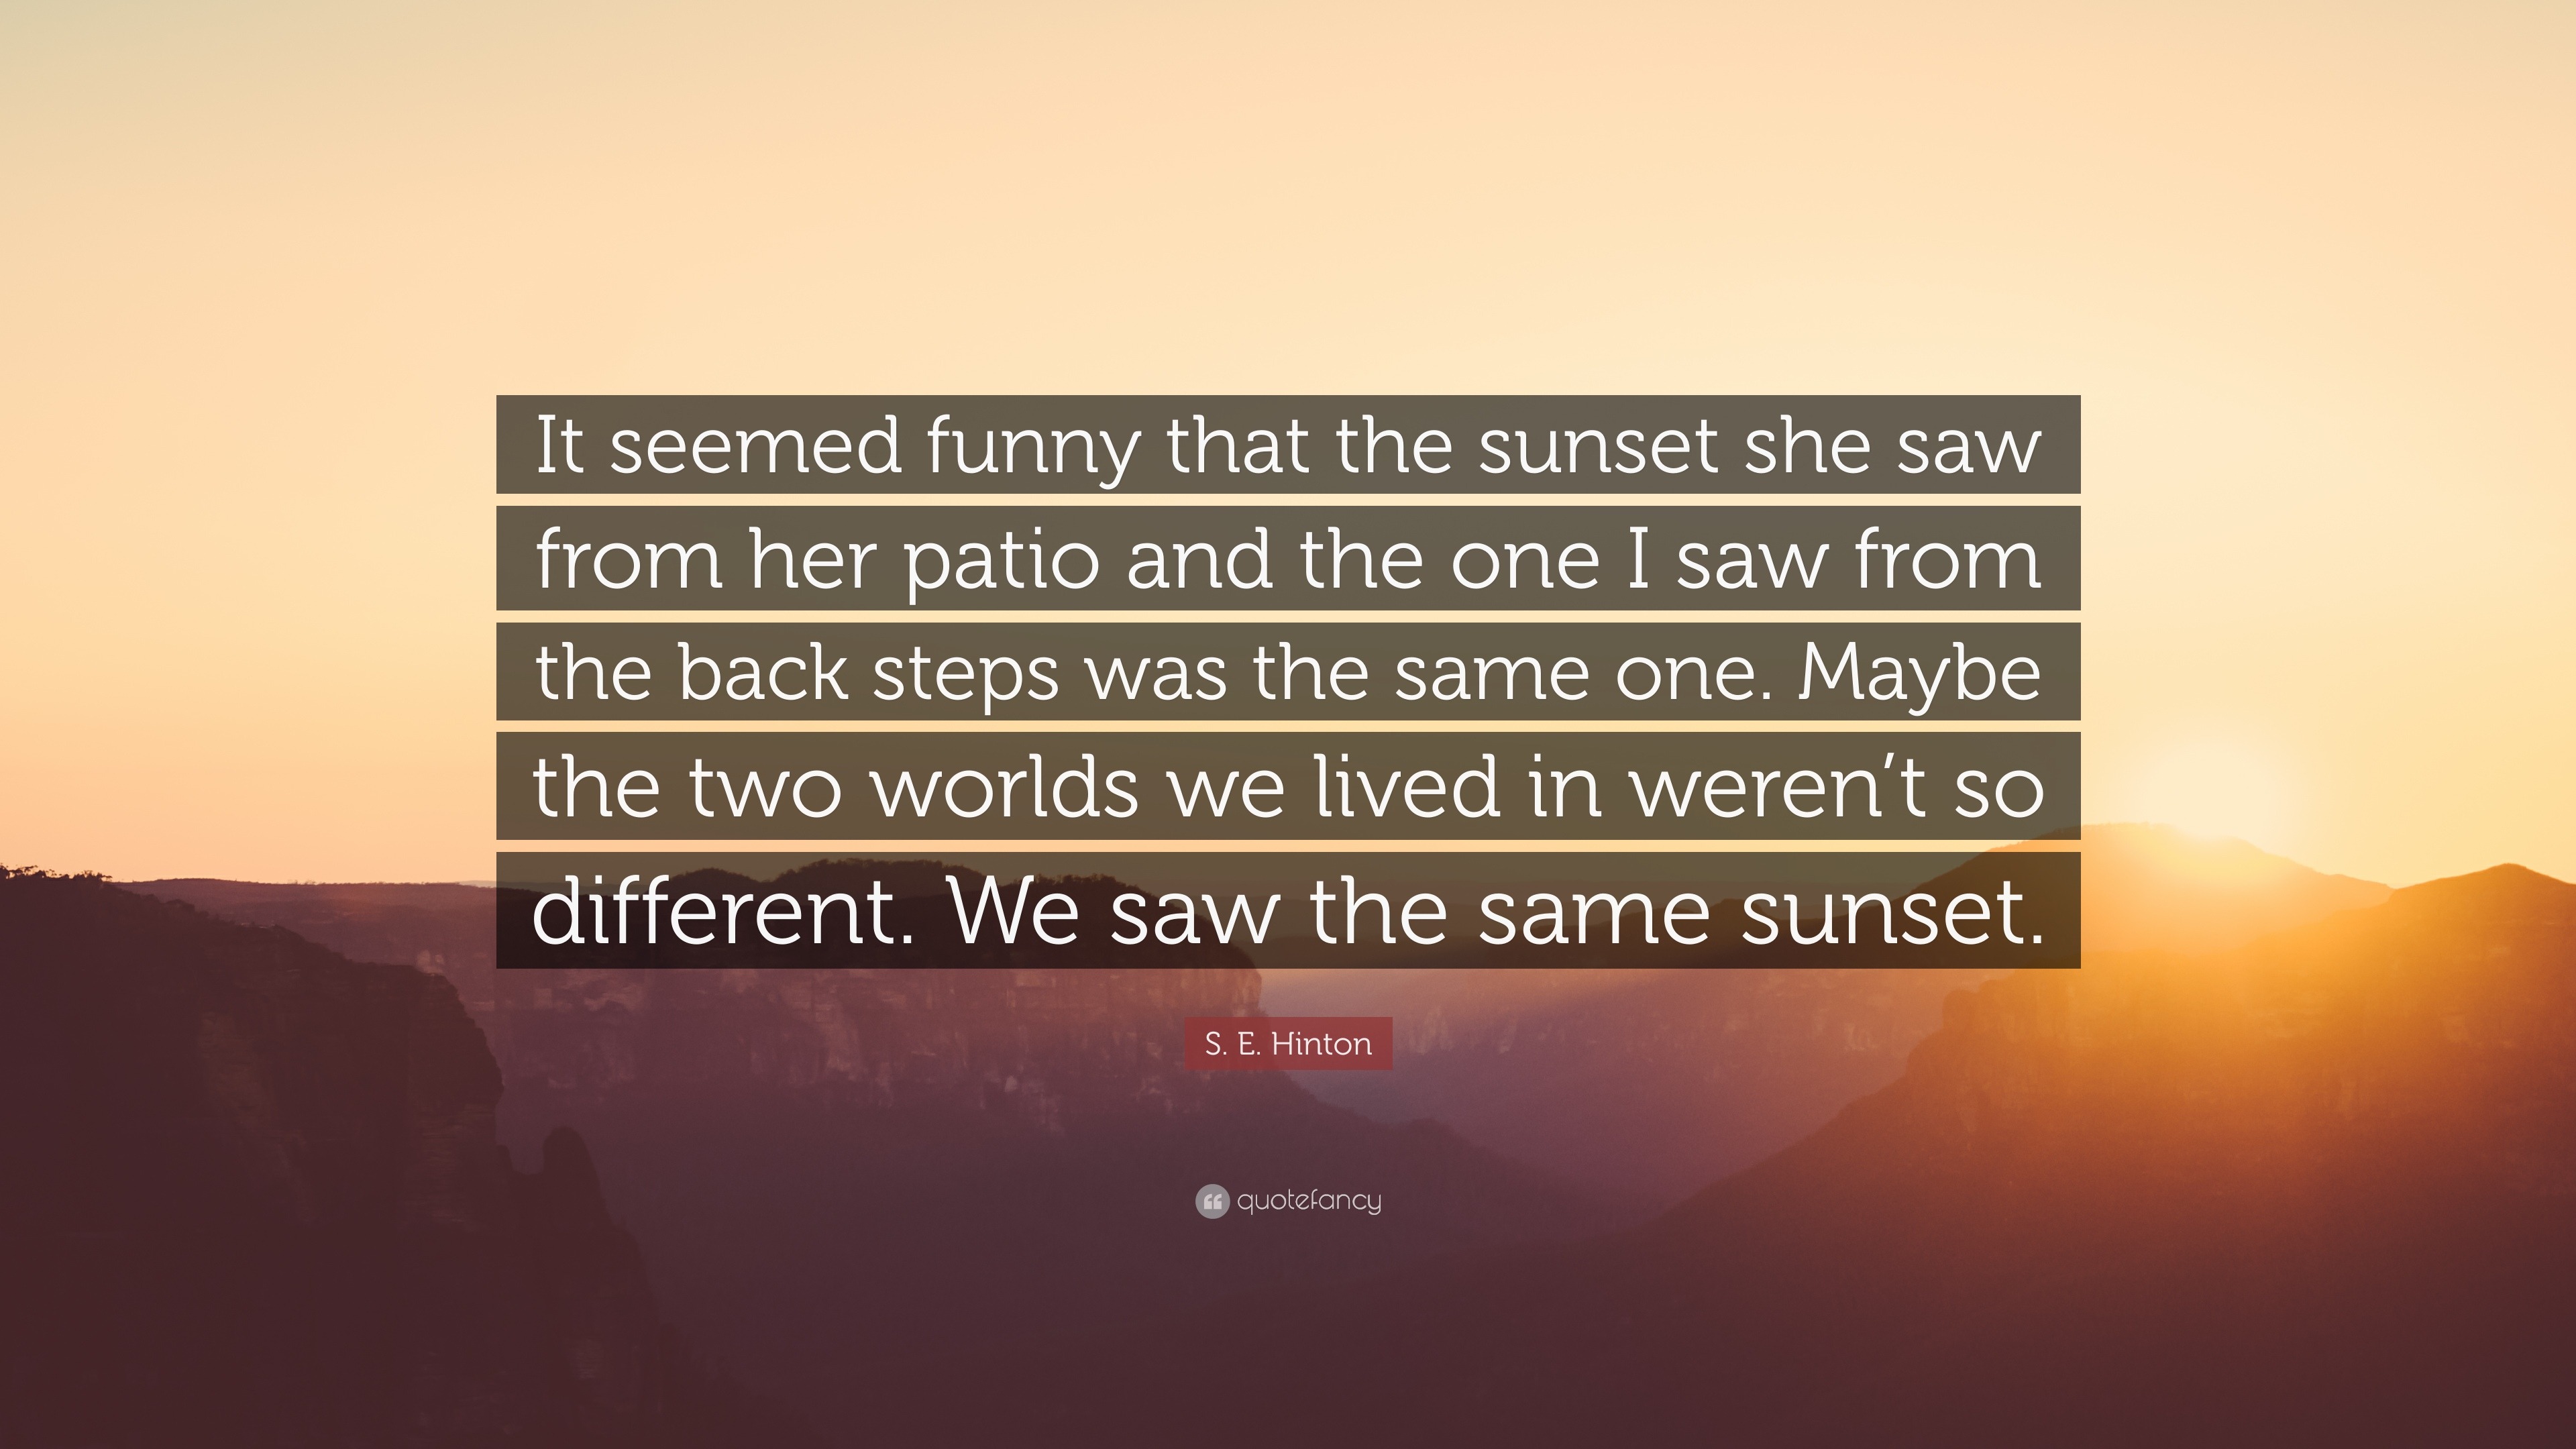 S. E. Hinton Quote: “It seemed funny that the sunset she saw from her patio  and the one I saw from the back steps was the same one. Maybe the...”